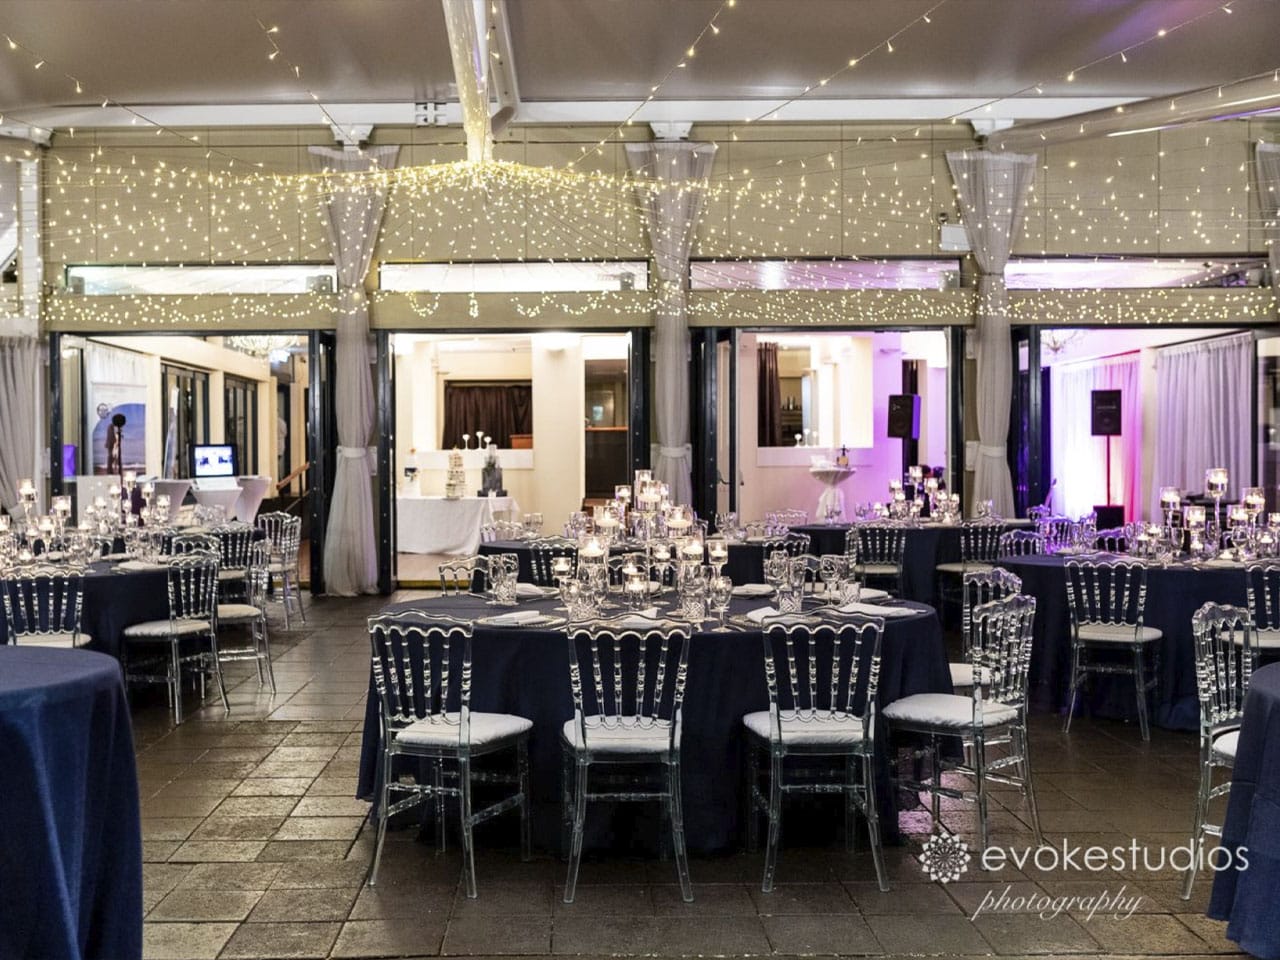 Chairs And Tables In Banquet Style With String Lights Inside The Function Room